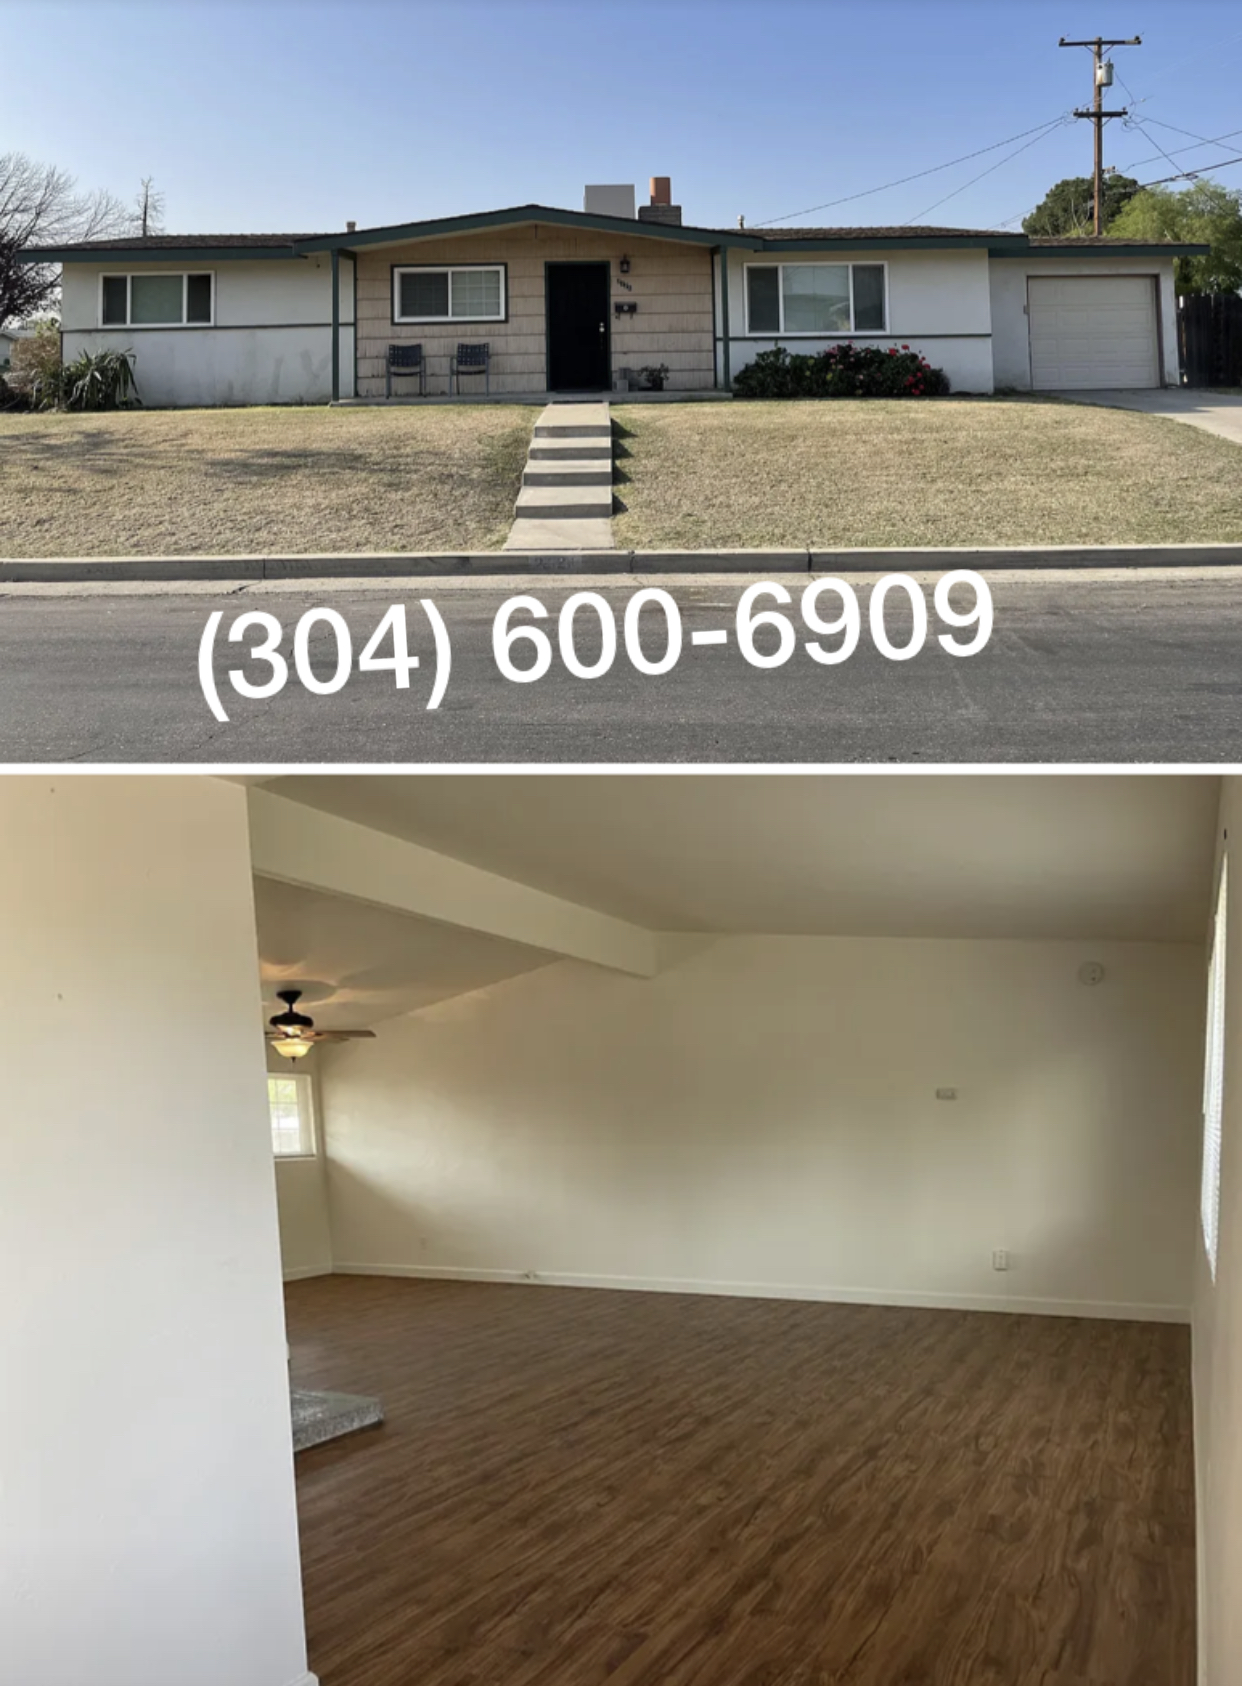 Photo: Anchorage House for Rent - $1100.00 / month; 3 Bd & 2 Ba